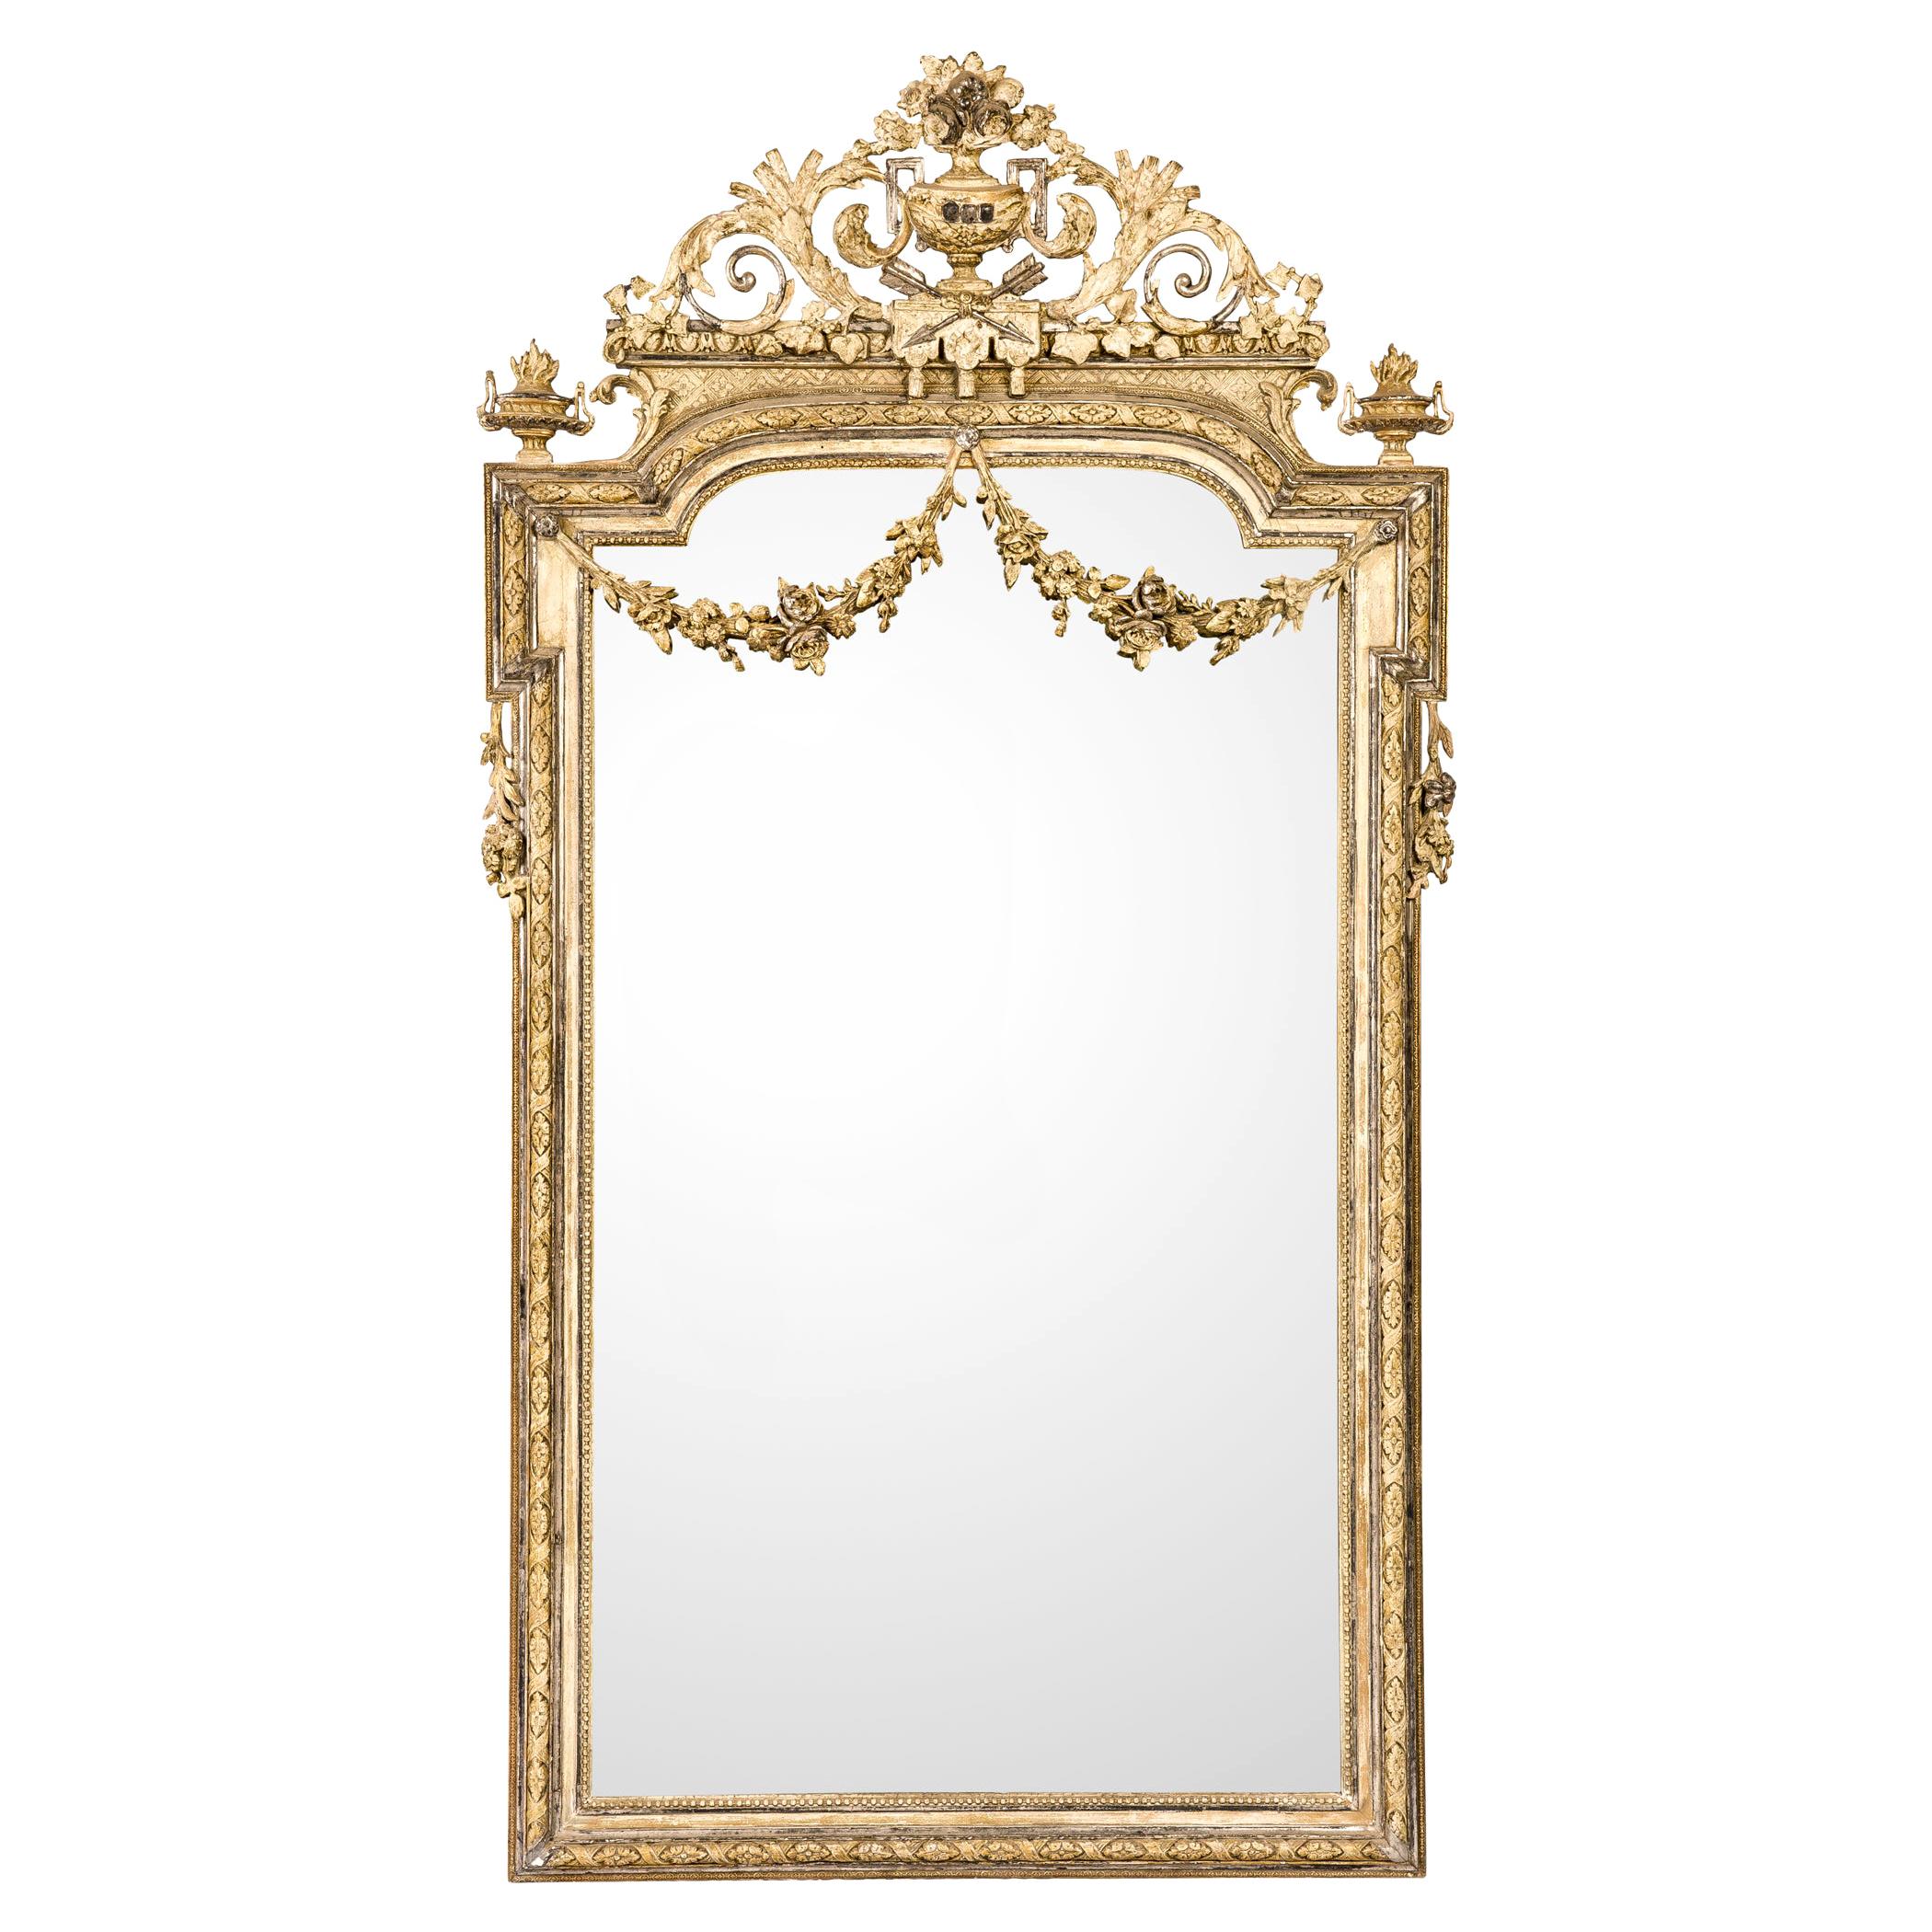 Antique French Silver and Gold Leaf Louis Seize Mirror with Floral Garlands